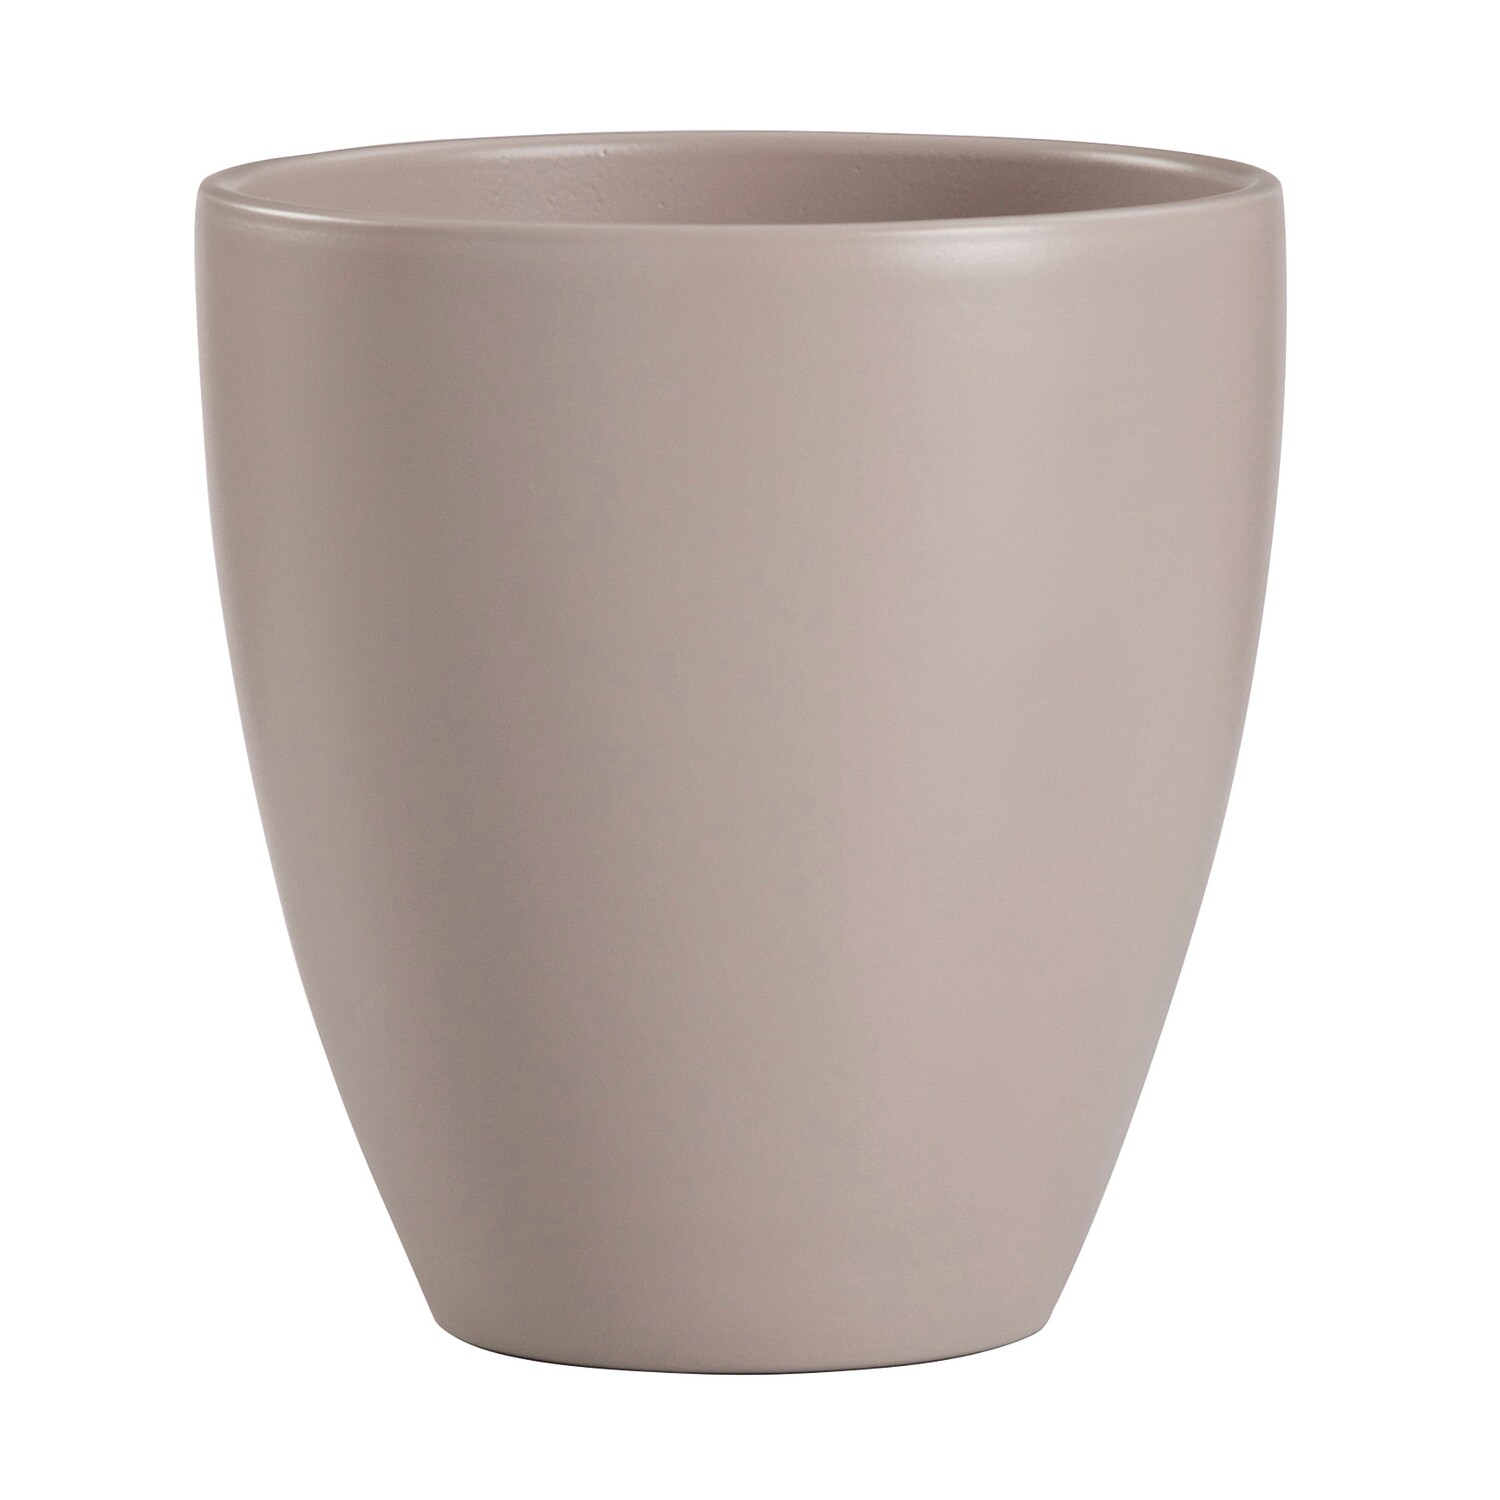 Pot 620/15 Taupe (Pot) - Nature by Marc Beyrouthy